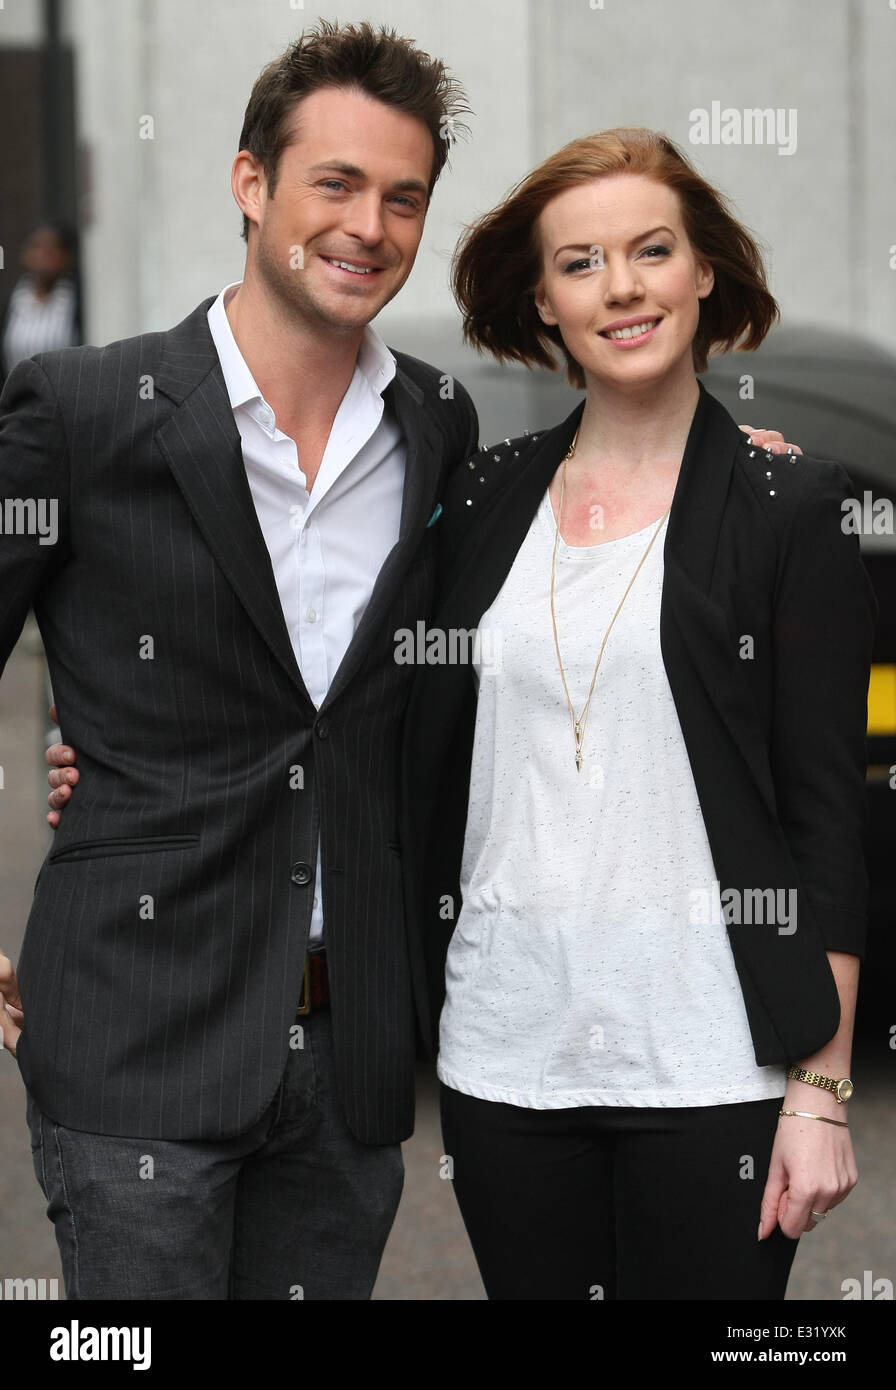 Celebrities leaving the ITV Studios  Featuring: Niamh McGrady,Jules Knight Where: London, United Kingdom When: 14 May 2013 Credi Stock Photo